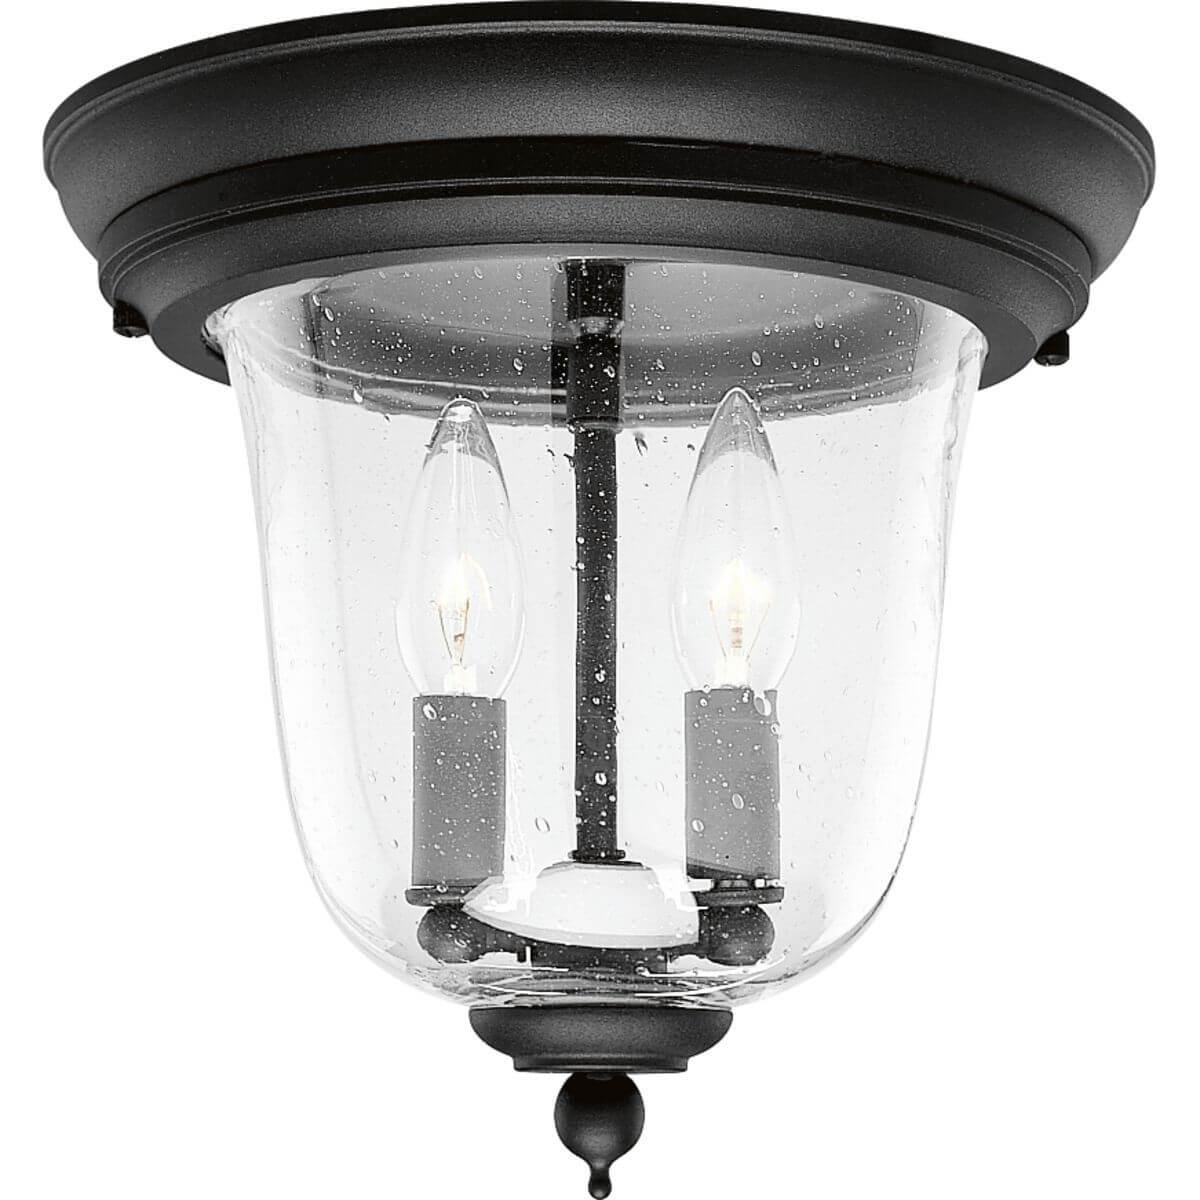 Progress Lighting Ashmore 2 Light 11 inch Outdoor Flush Mount in Textured Black with Clear Seeded Glass P5562-31